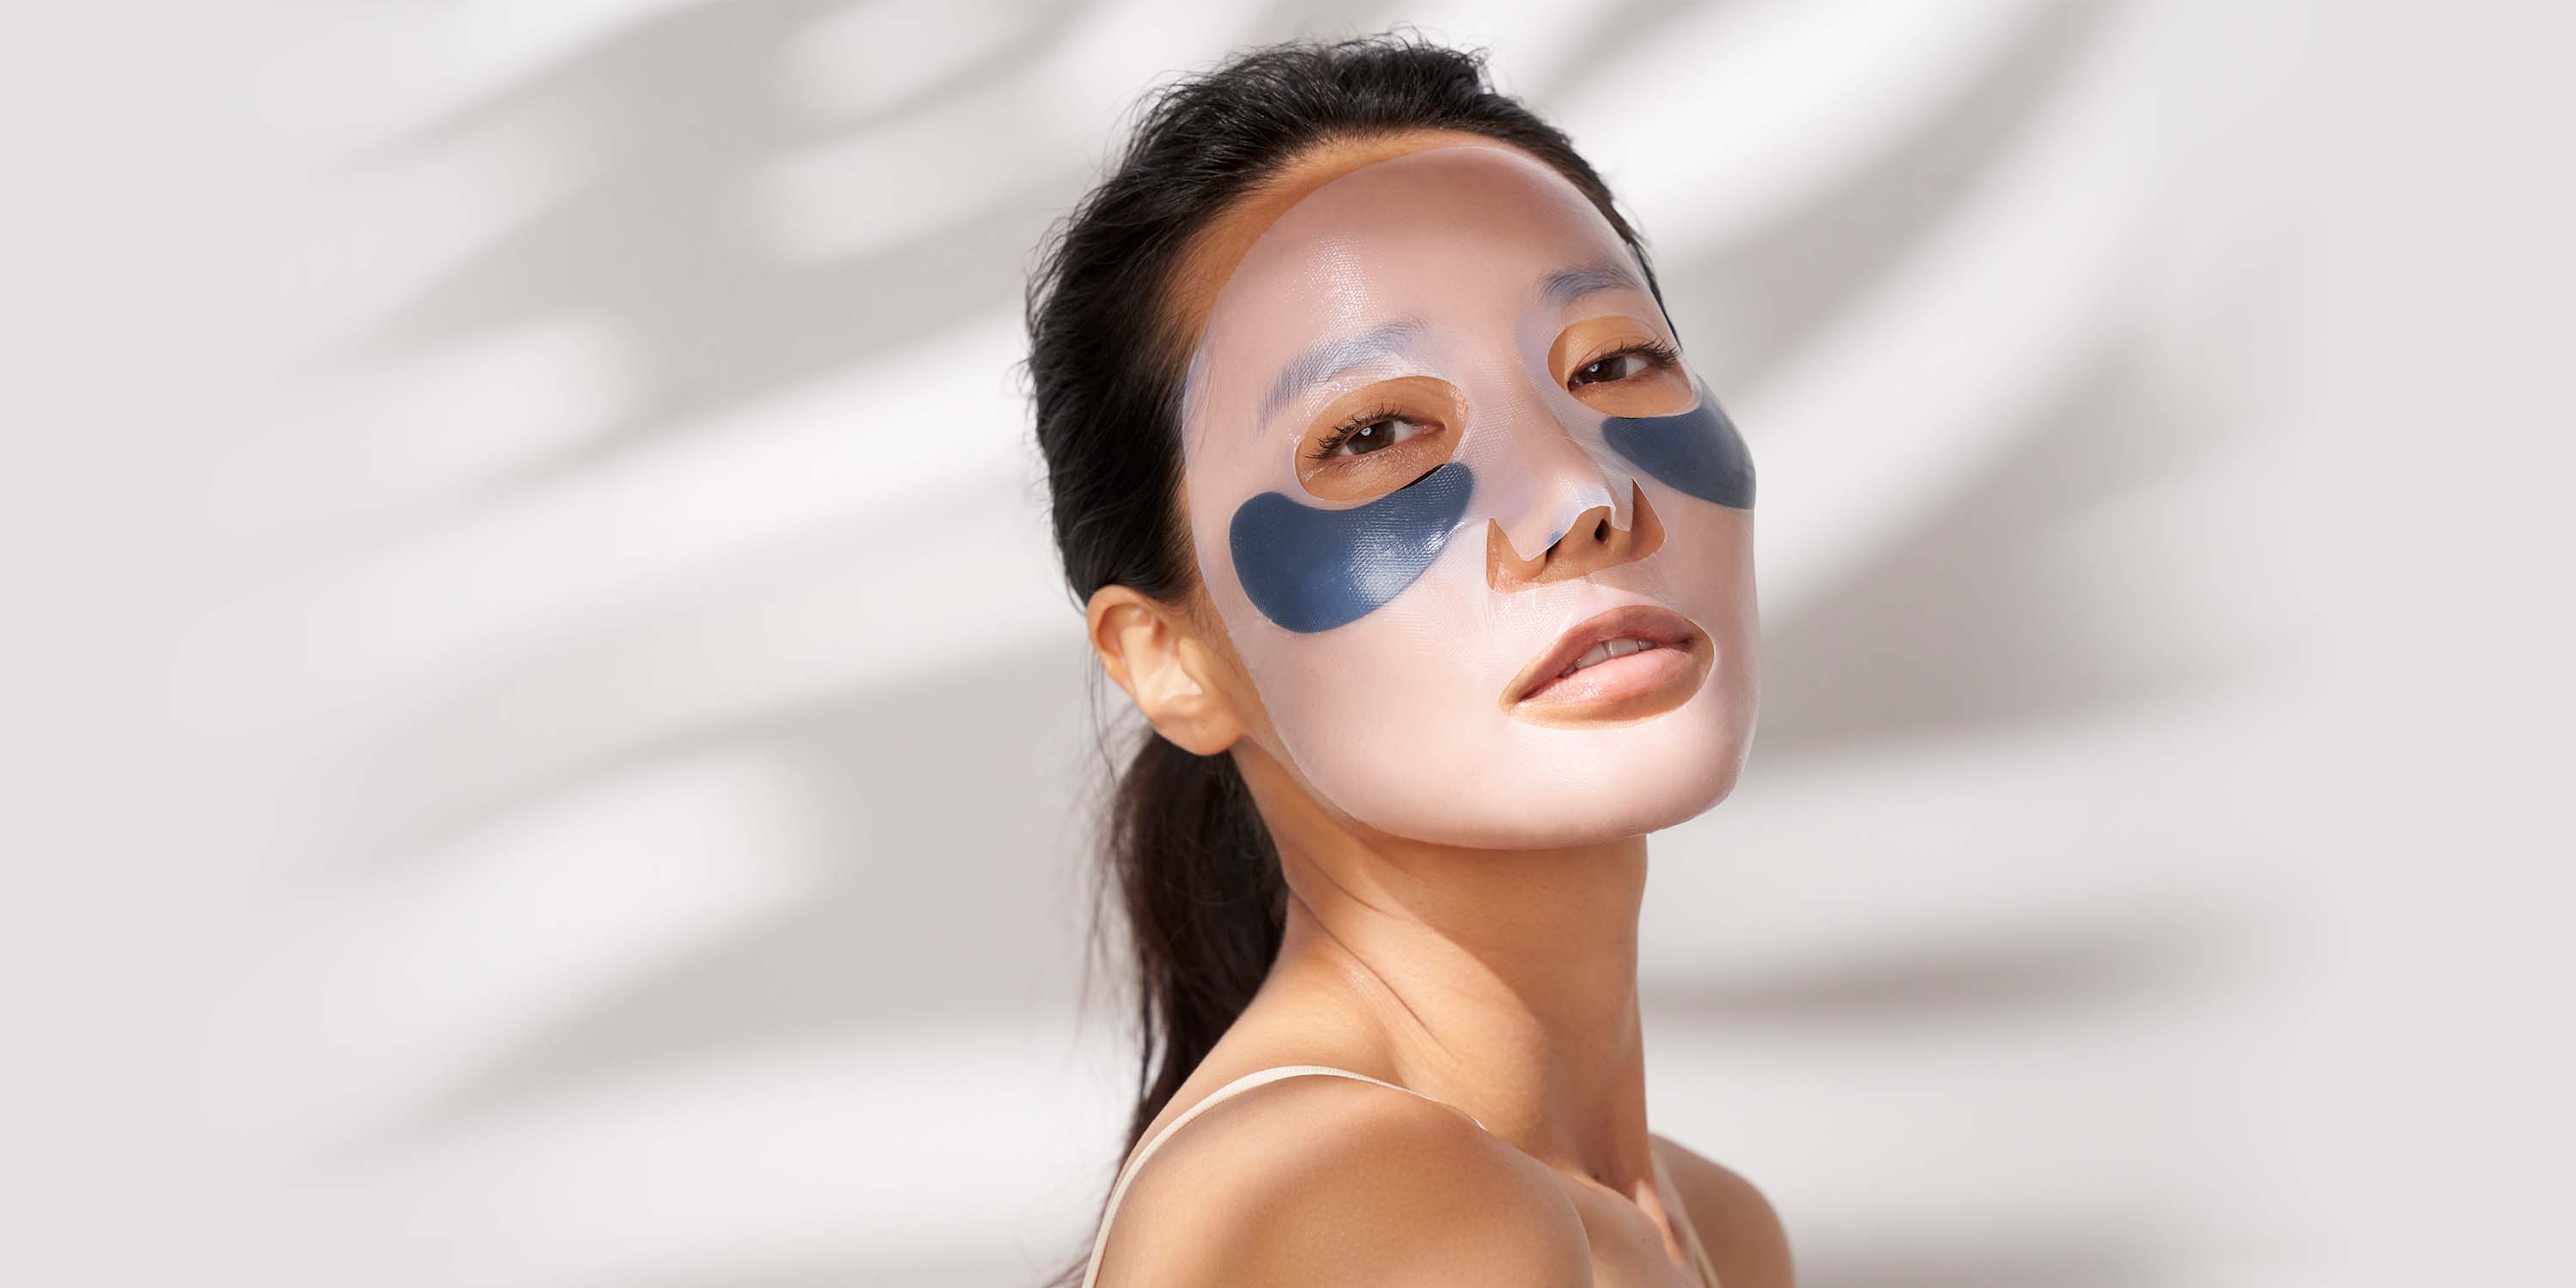 A new concept of medical, multifunctional, reusable, and aesthetic face  masks